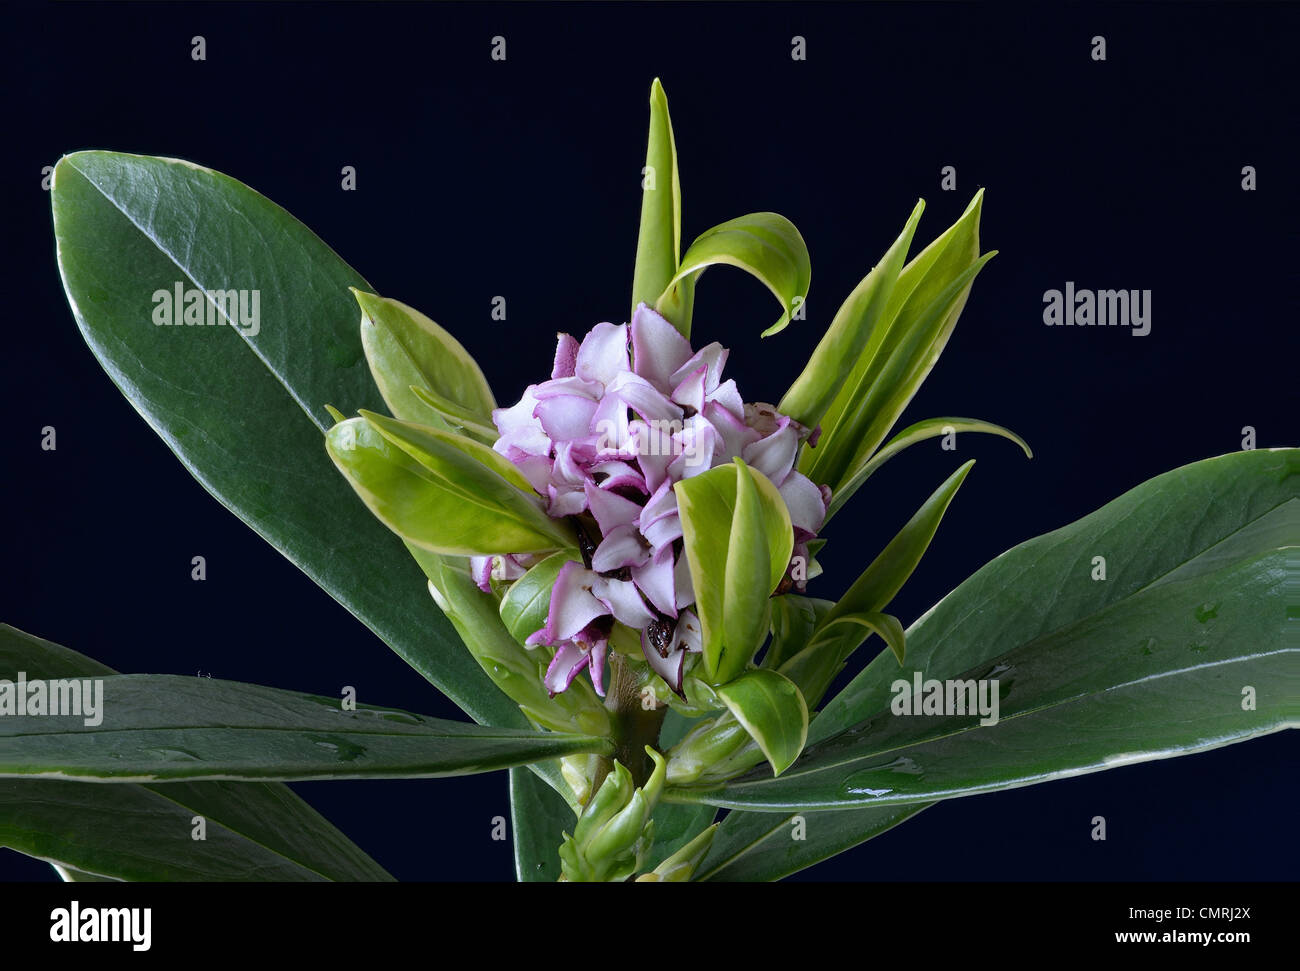 Close-up of Daphne Odora shrub with pale pink flowers Stock Photo